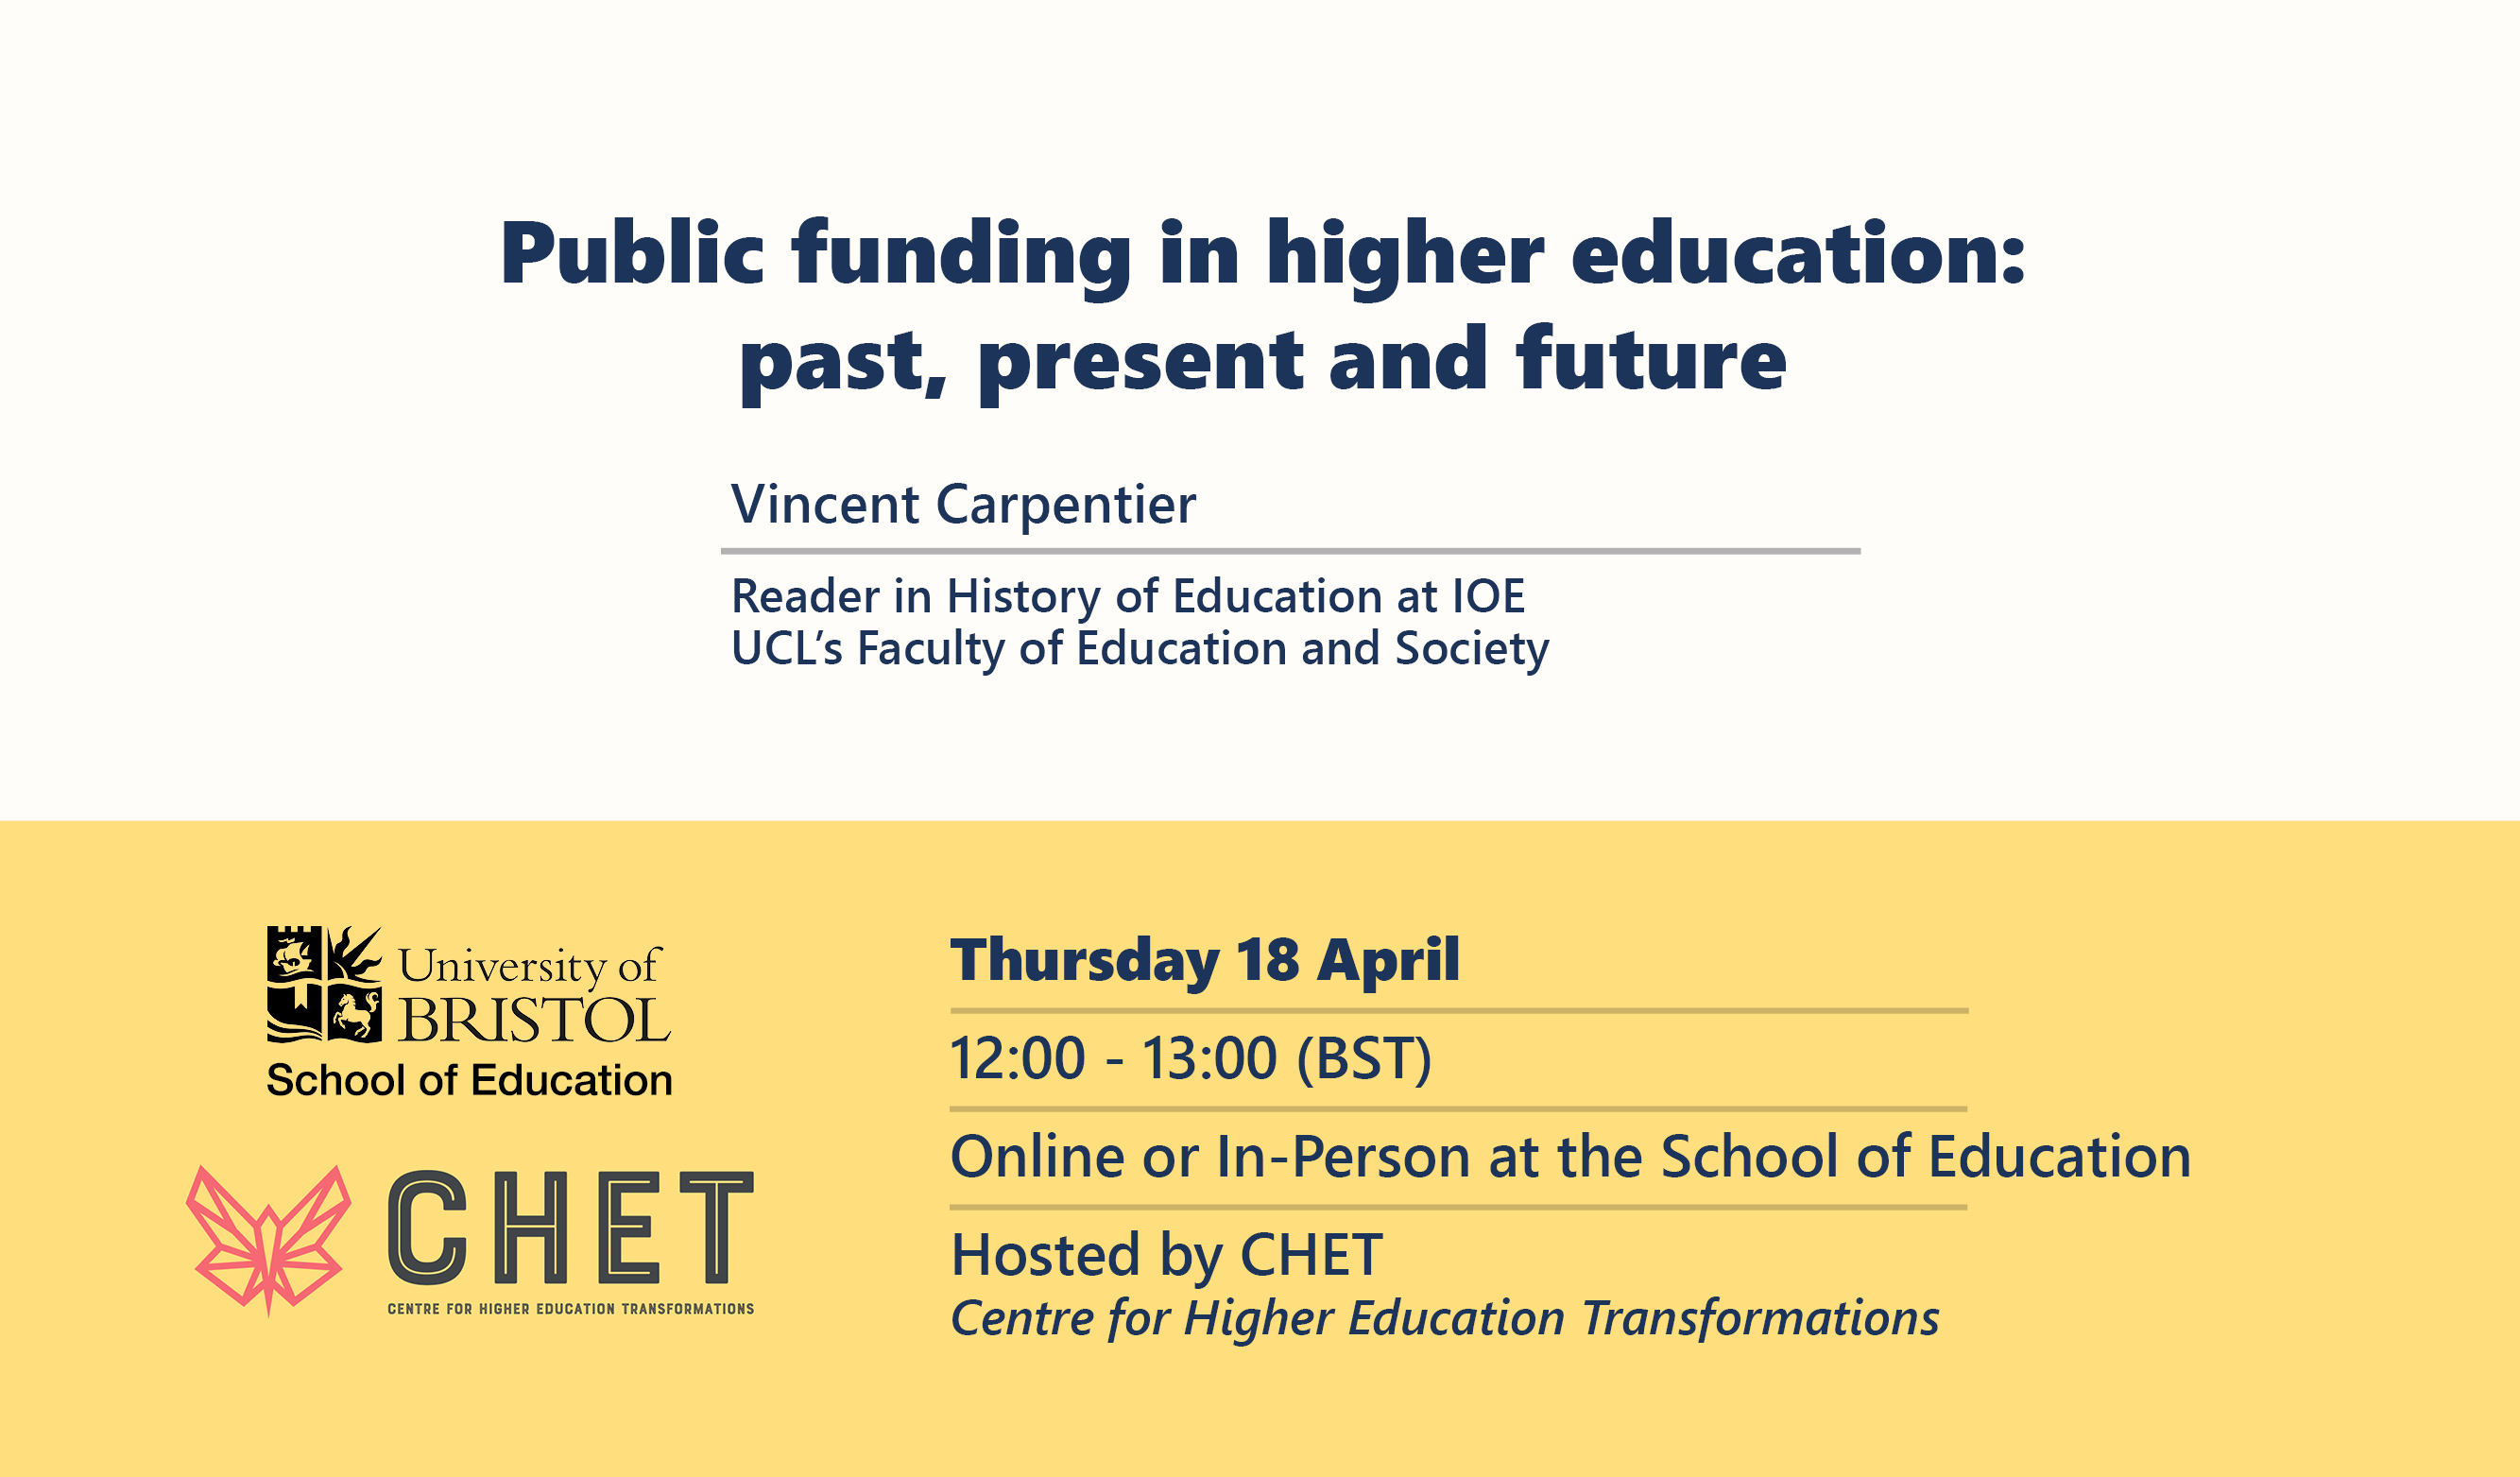 Poster for Public funding in higher education: past, present and future event.